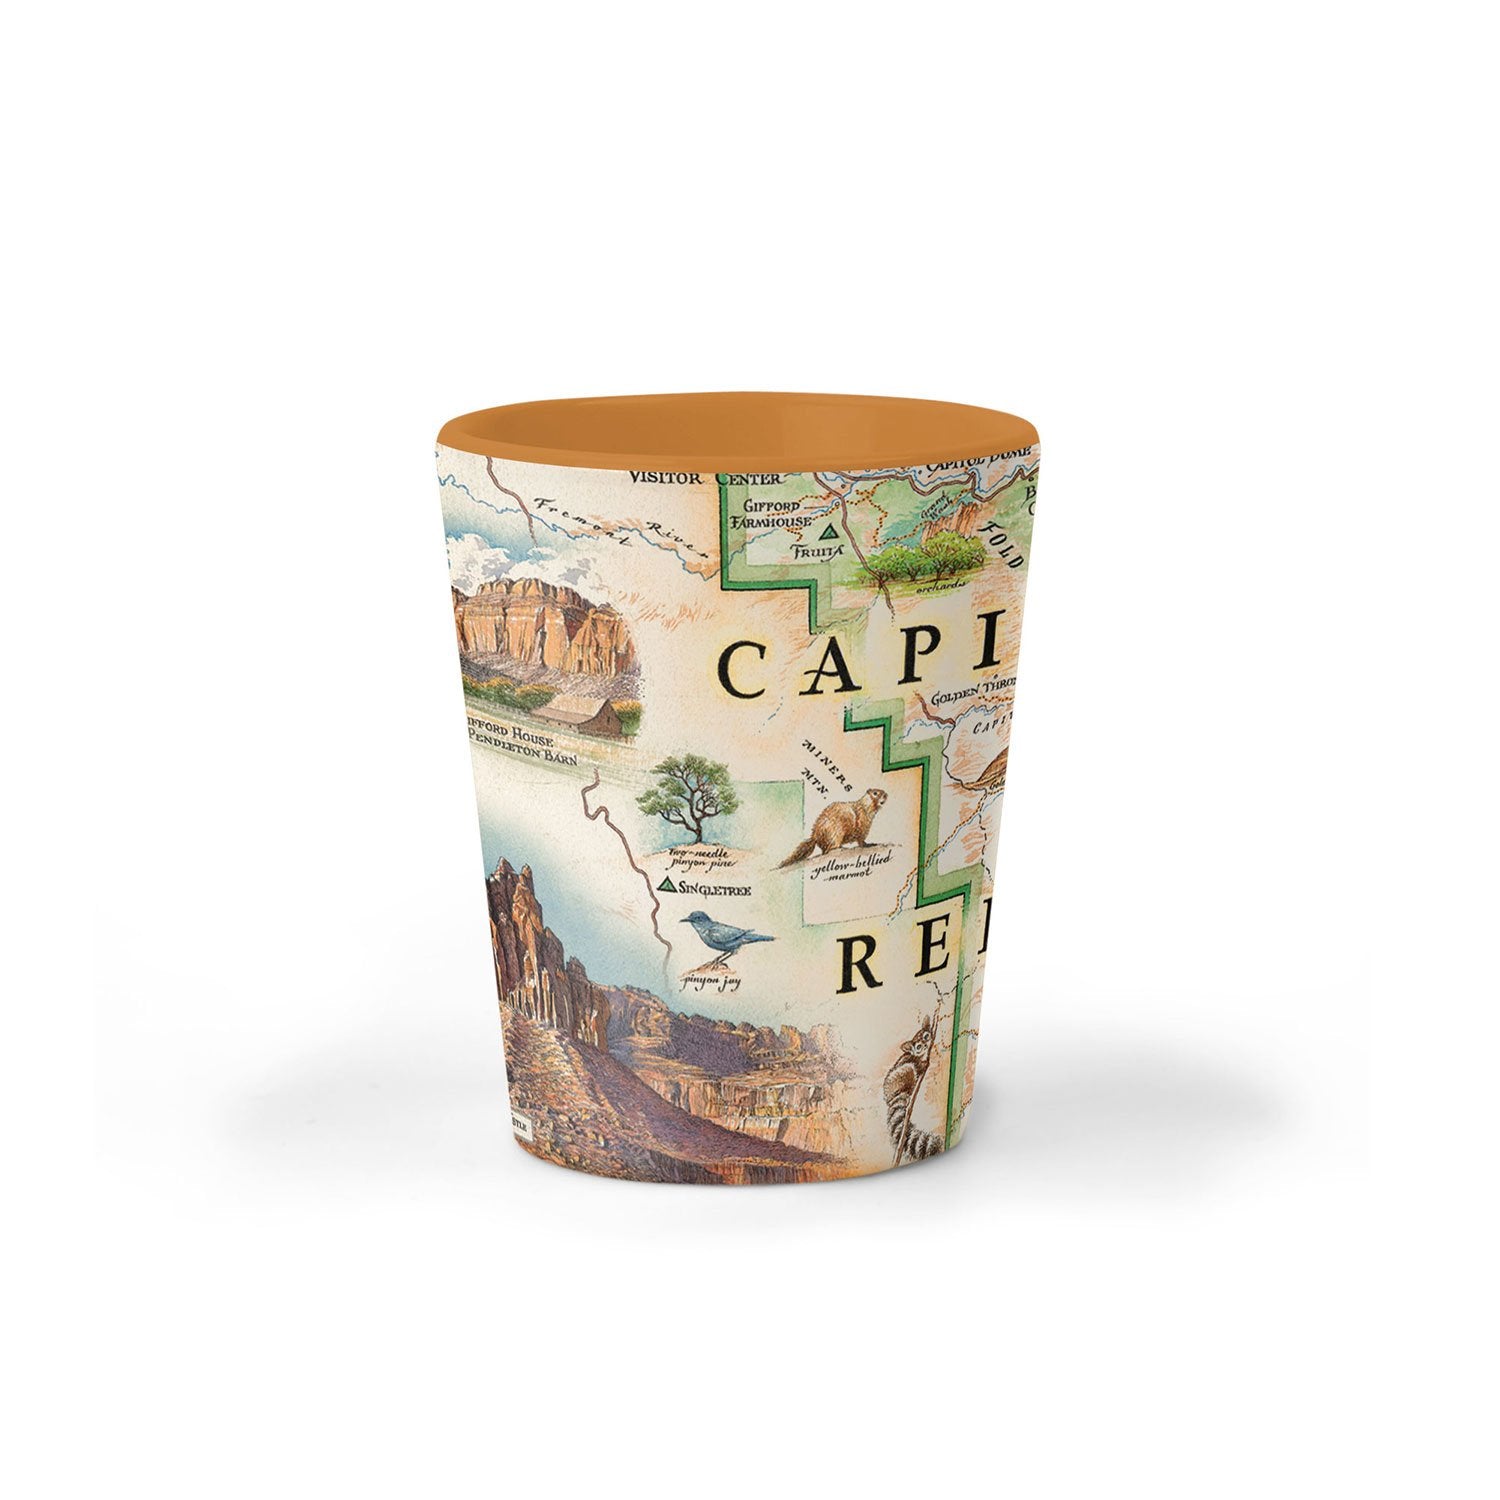 Utah's Capitol Reef National Park Map ceramic shot glass in earth tones. Featuring Claret Cup Cactus, Narrowleaf Yucca, Prince's Plume, and the Two-Needle Pinyon Pine. Detailed depictions of landmarks and geographic wonders like the Lower Muley Twist Canyon, Capitol Gorge, and Hickman Natural Bridge. 